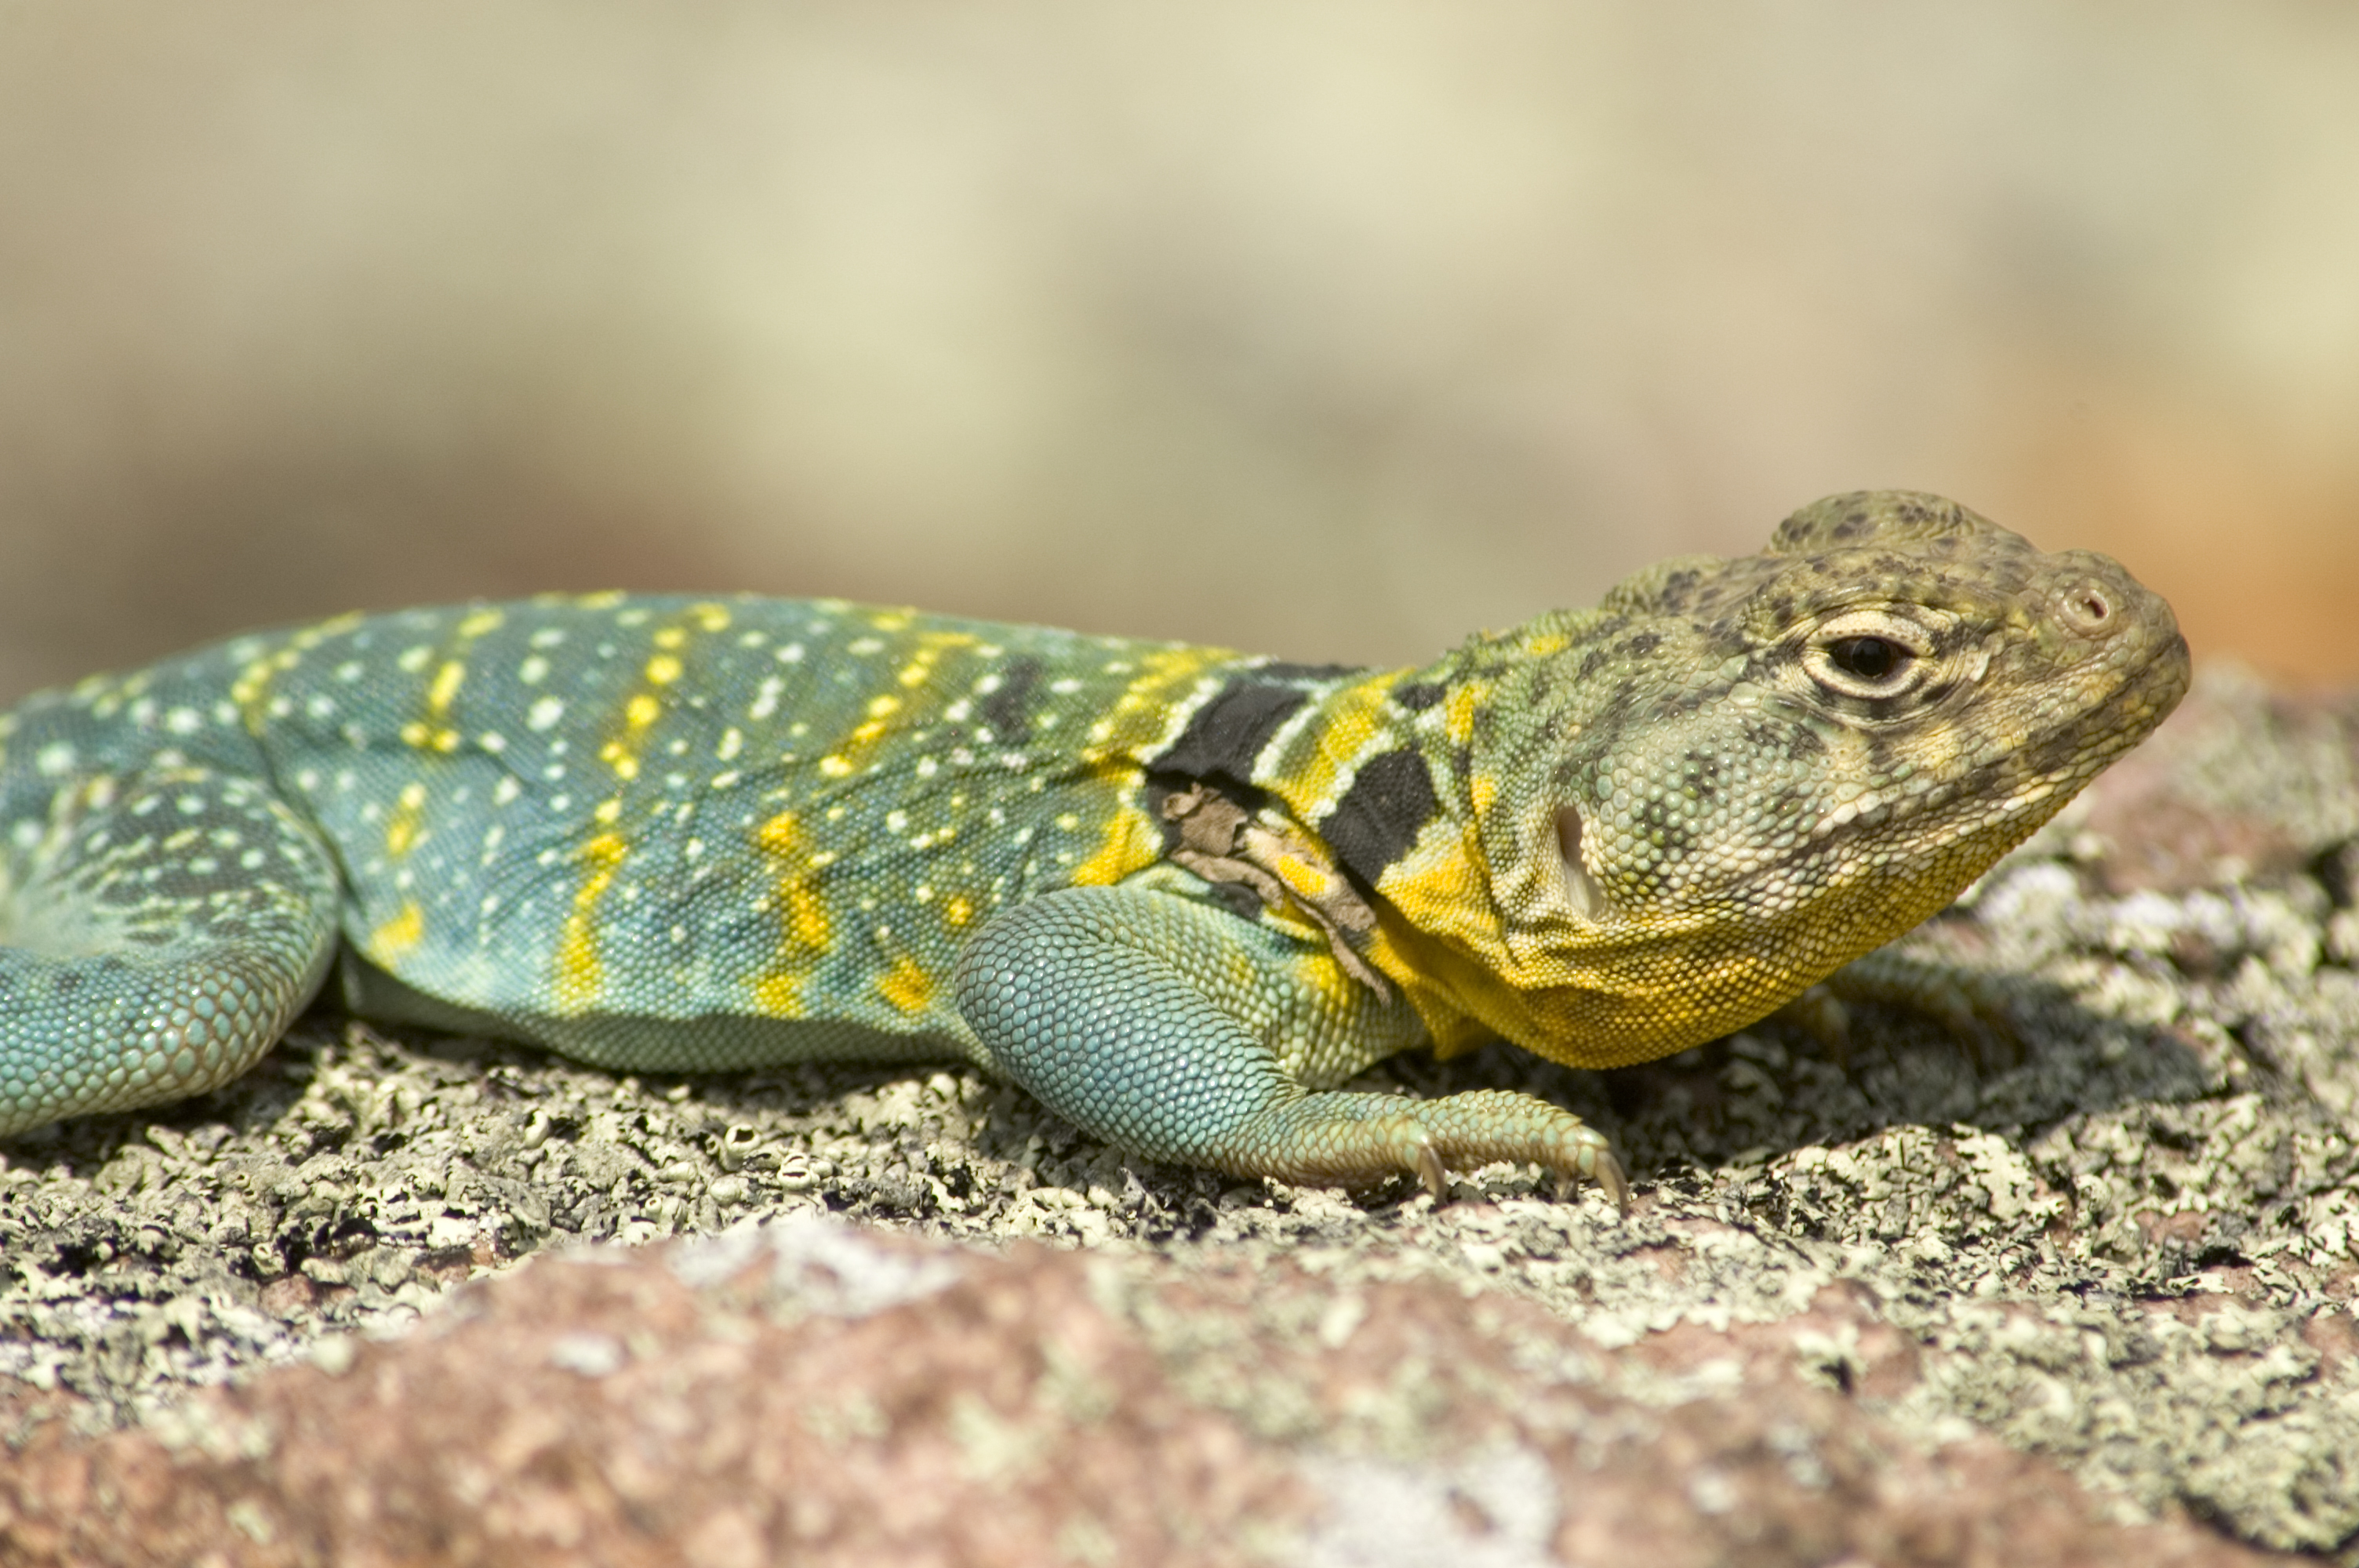 Lizard Facts | MDC Discover Nature